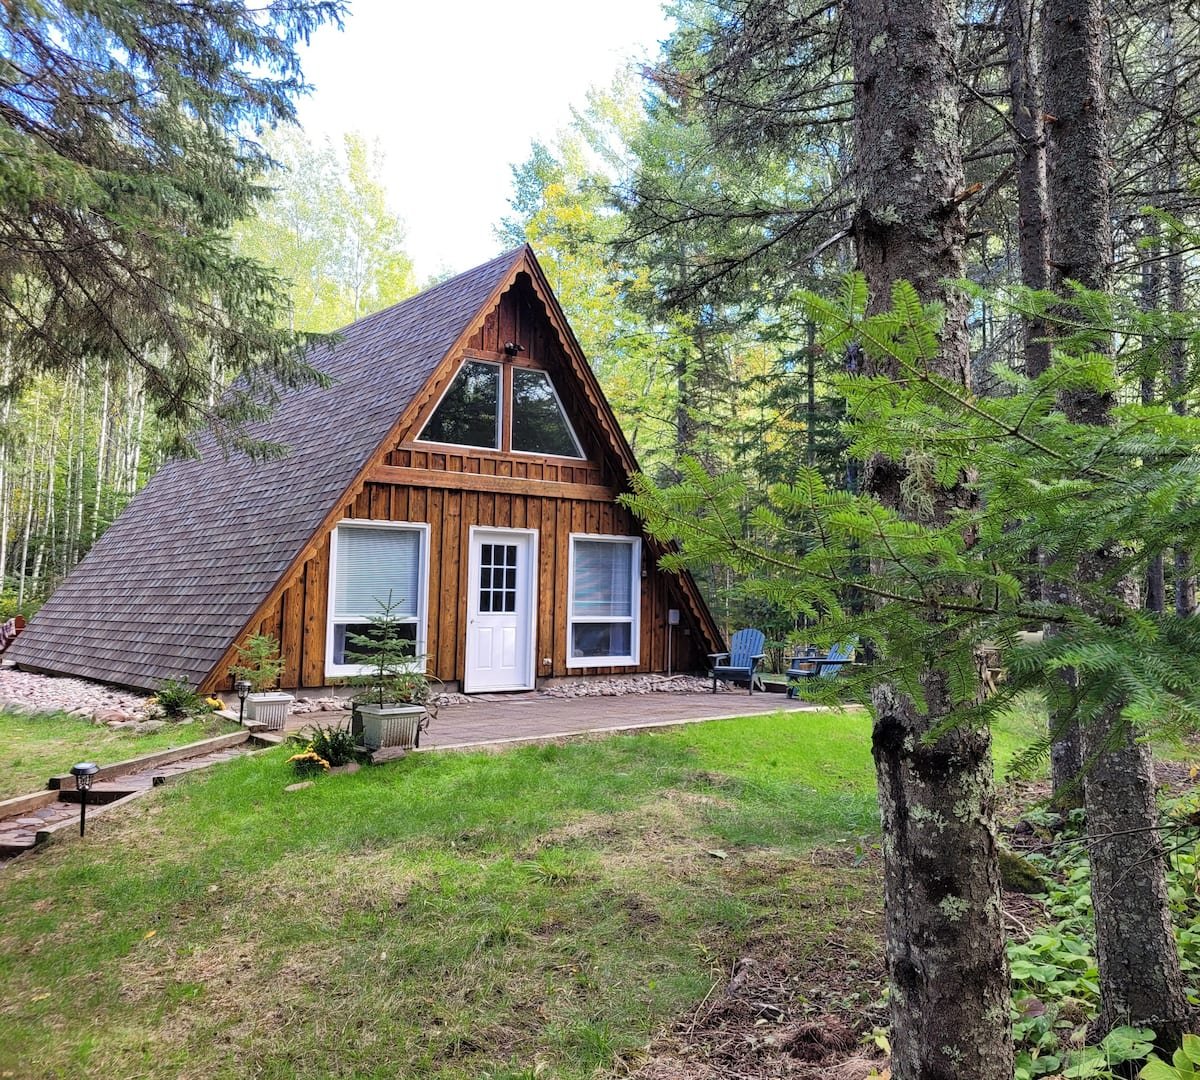  This  A-frame escape  sits on 5 acres of land with an idyllic woodland setting and a lake view.    Typical starting price: $171    Location: Herbster, Wisconsin    Sleeps: 5 guests    Rating: 5.0    Pet Fee: $50  